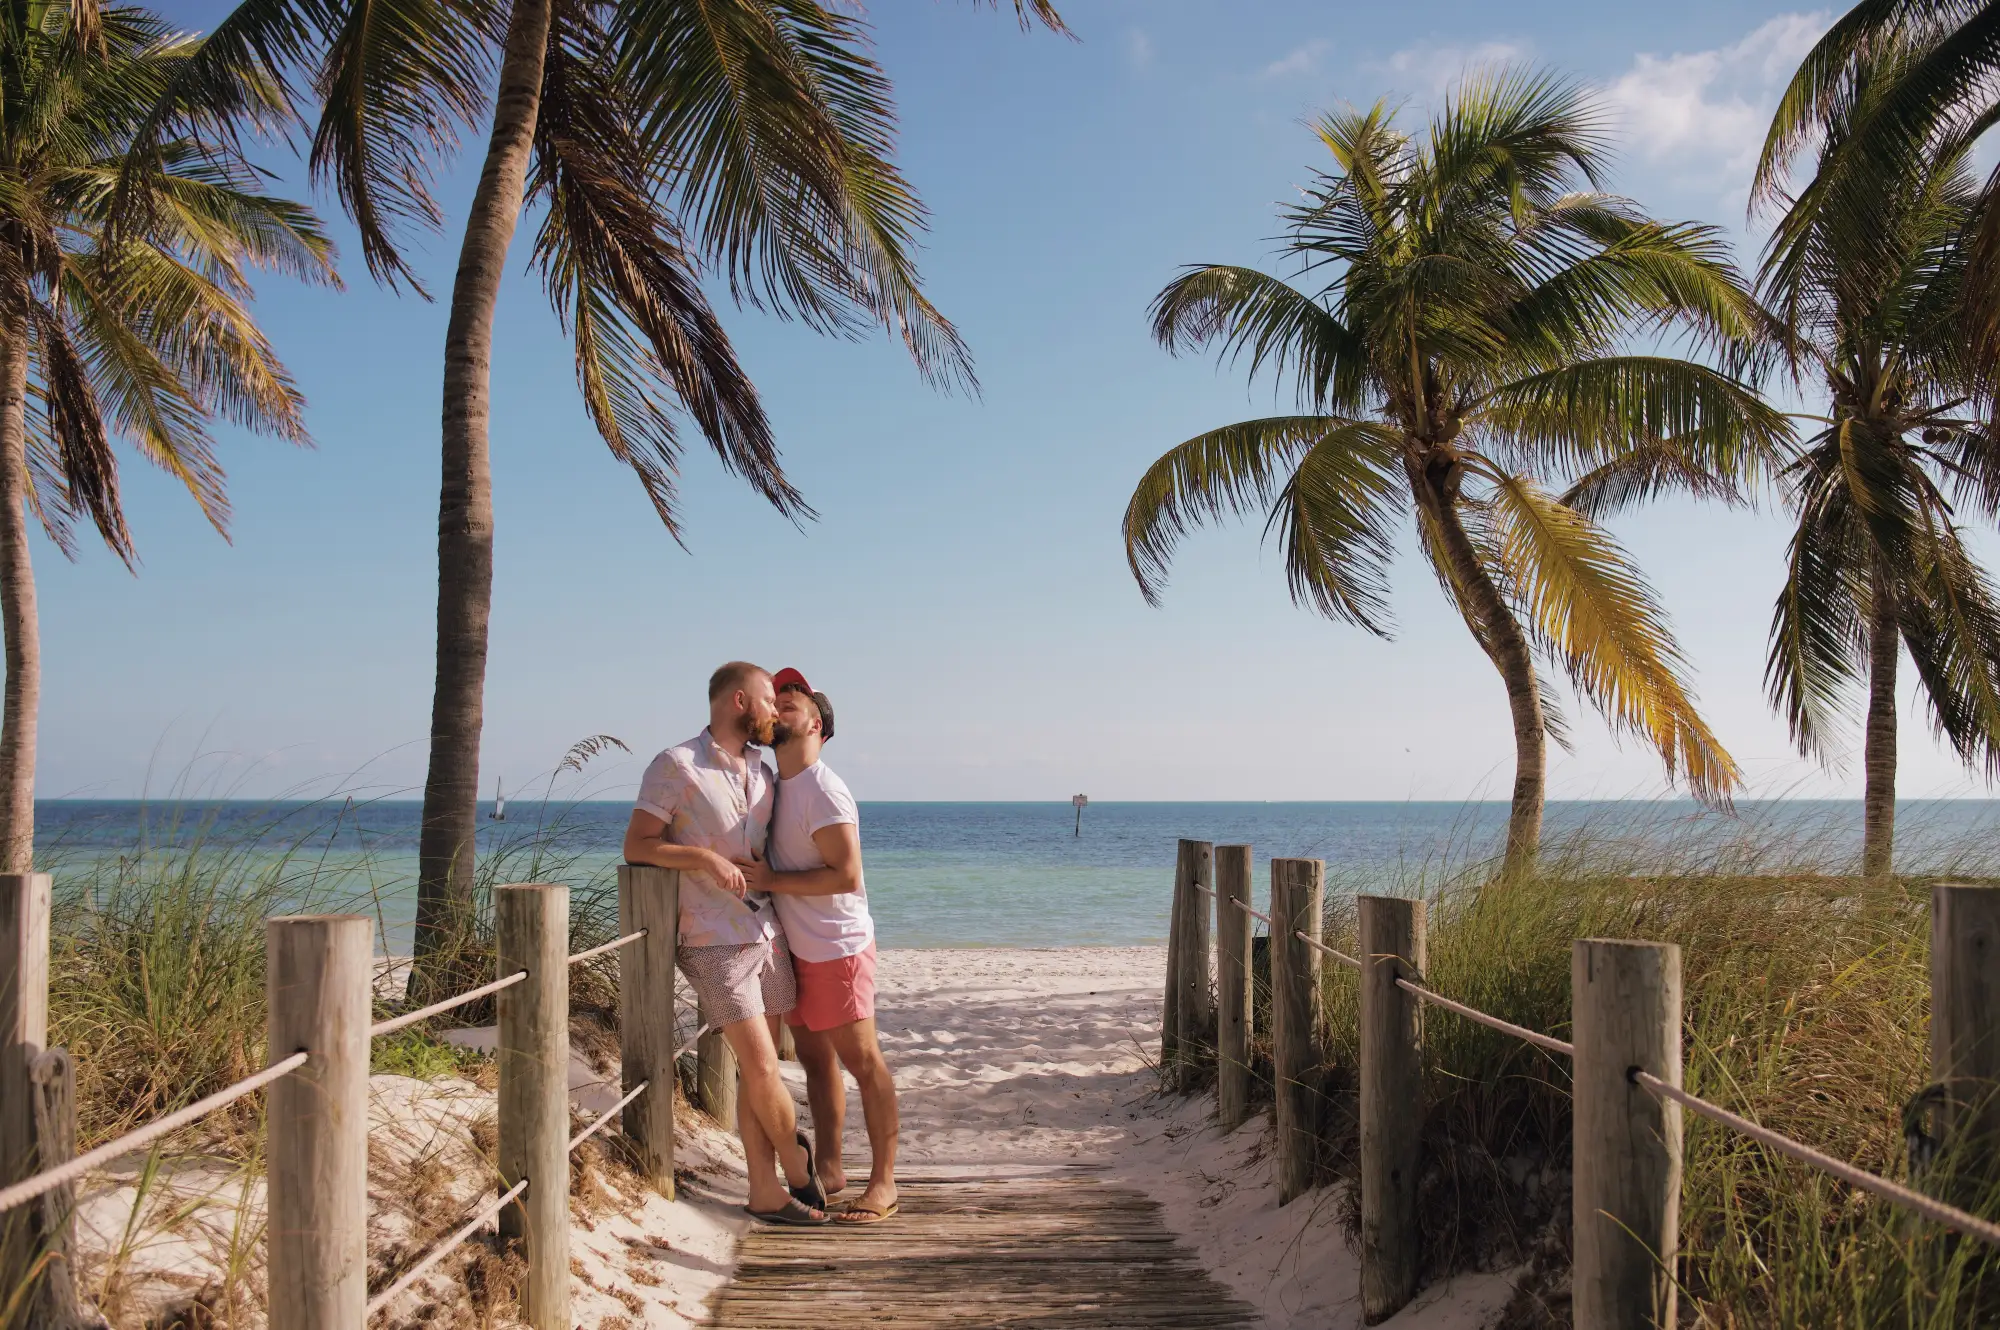 Road trip across the Florida Keys to Key West | A Gay Couple on the road